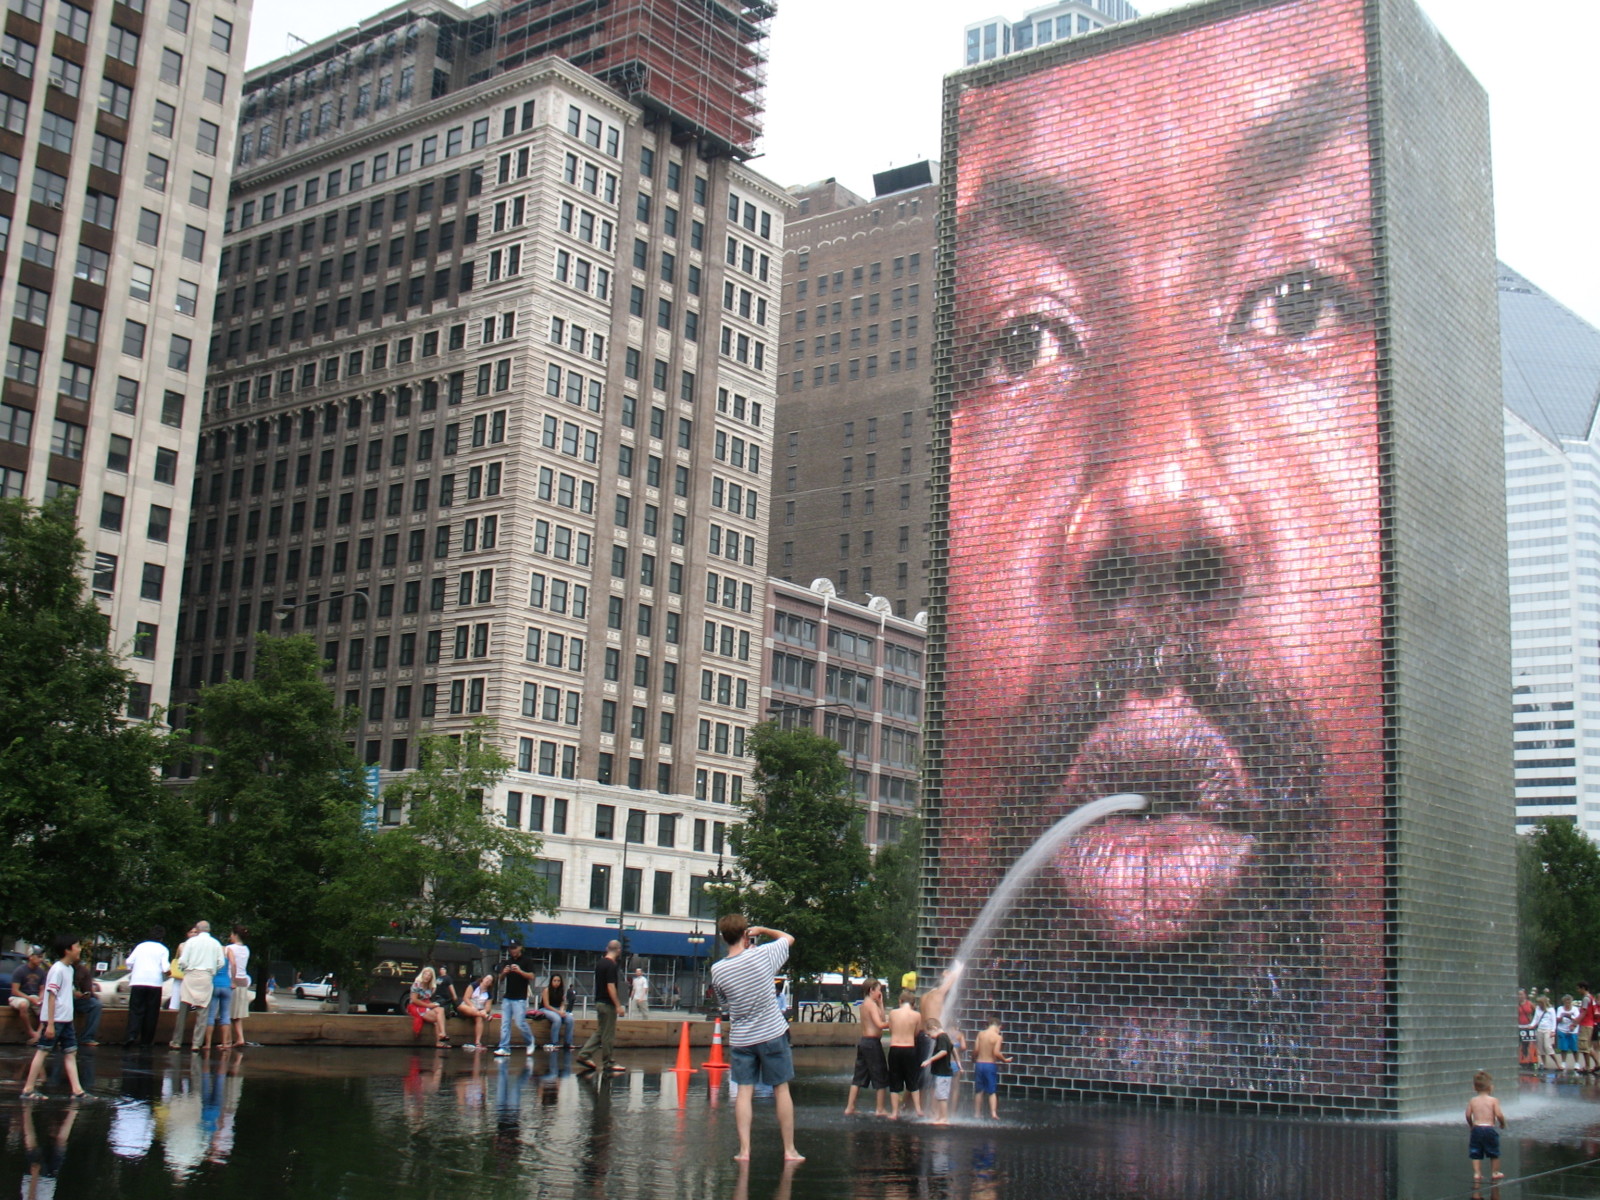 Jaume Plensa’s giant Crown Fountain sculpture in Chicago spits out water